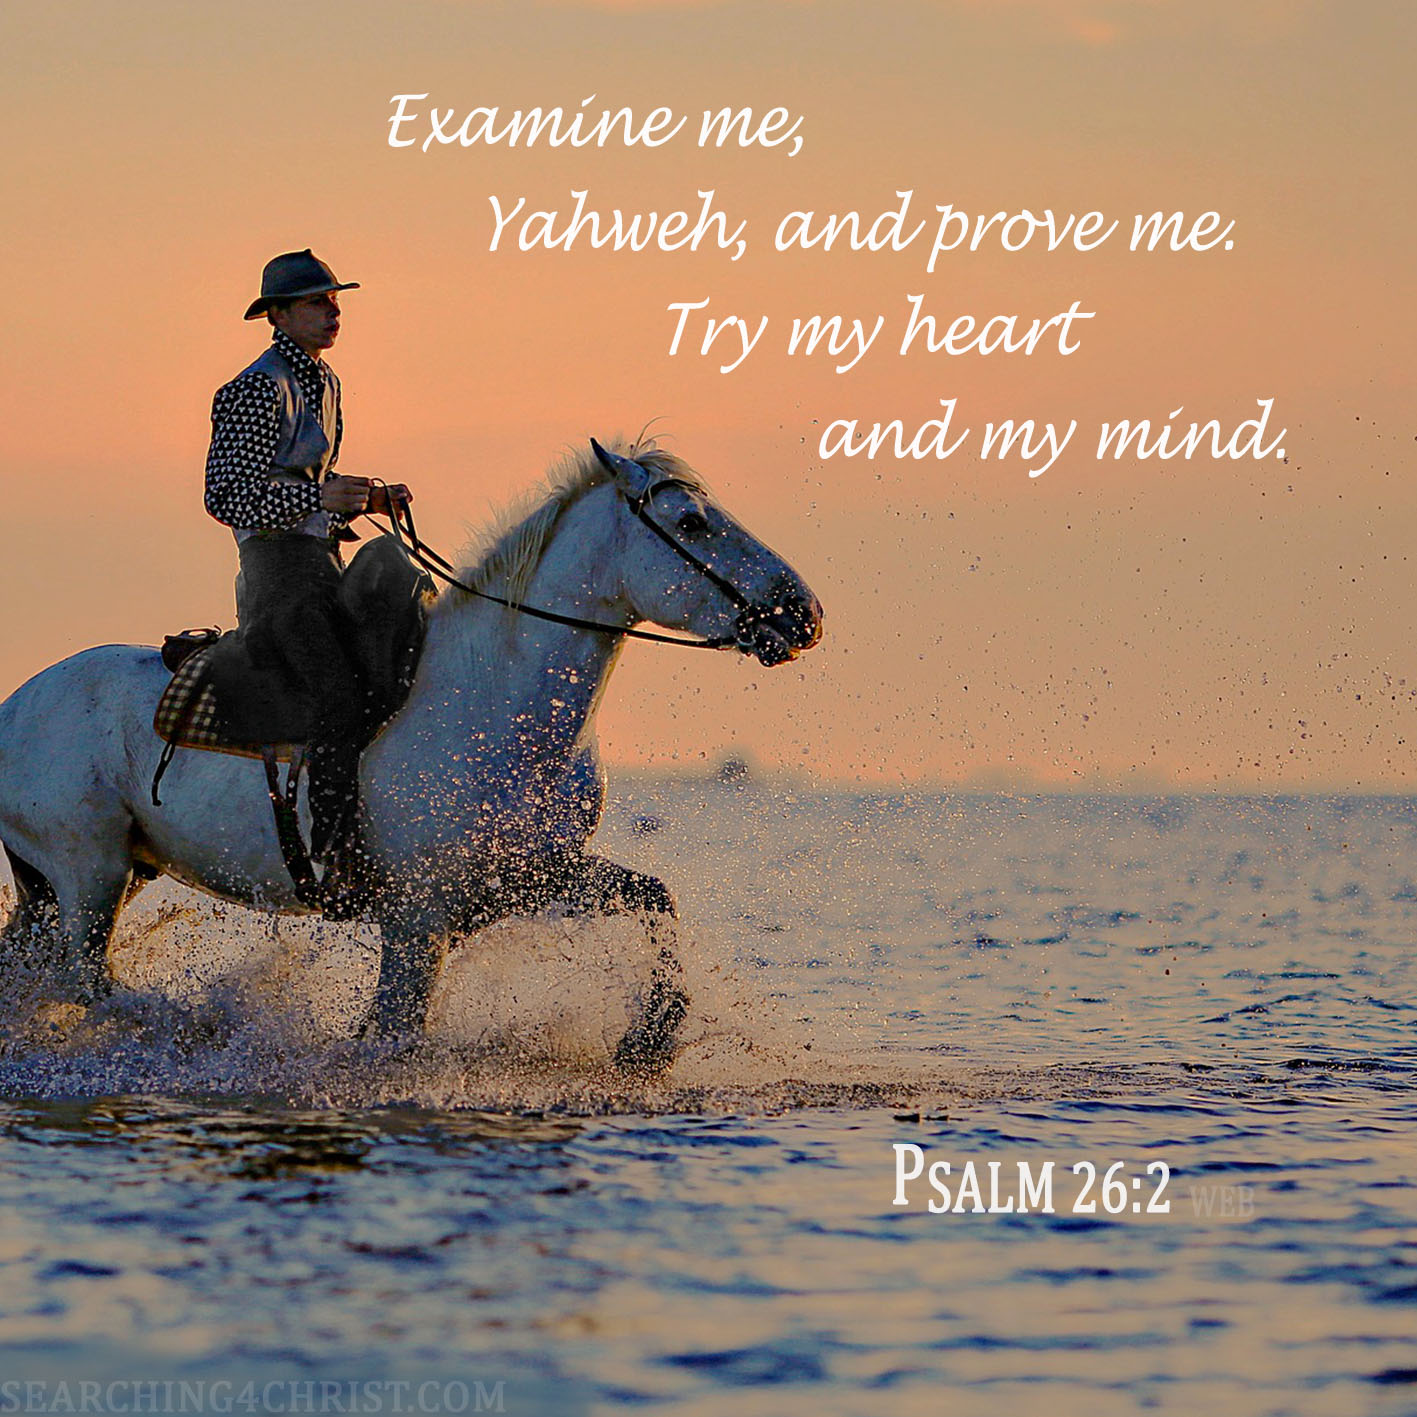 Examine me, Yahweh, and prove me. Try my heart and my mind. Psalm 26:2: